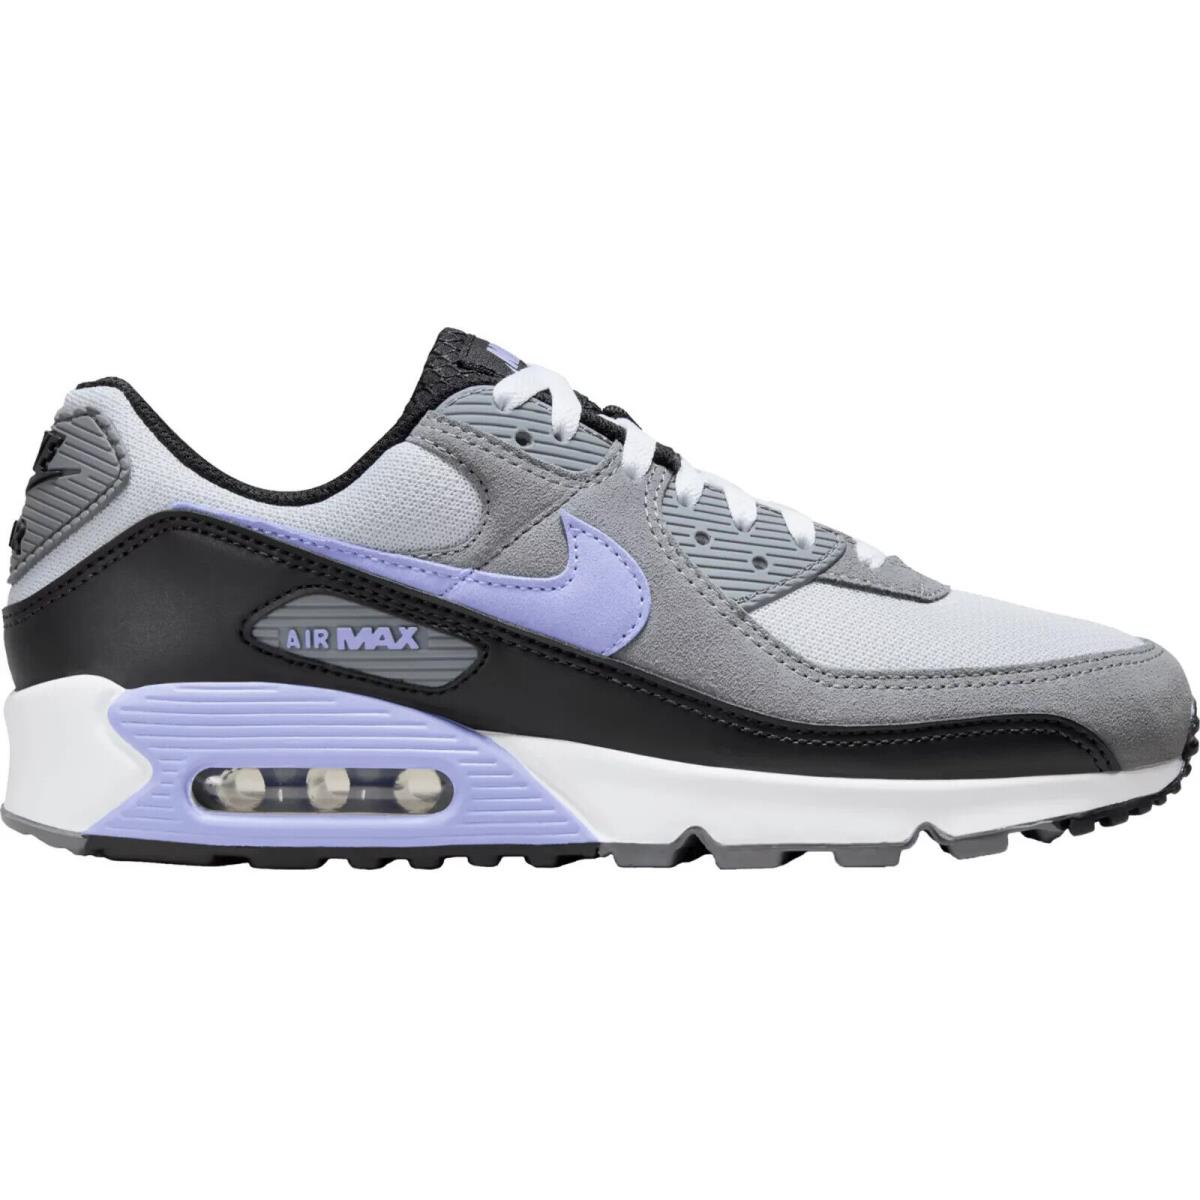 Nike Air Max 90 Men`s Casual Shoes All Colors US Sizes 7-14 Bestseller Photon Dust/Cool Grey/Black/Light Thistle